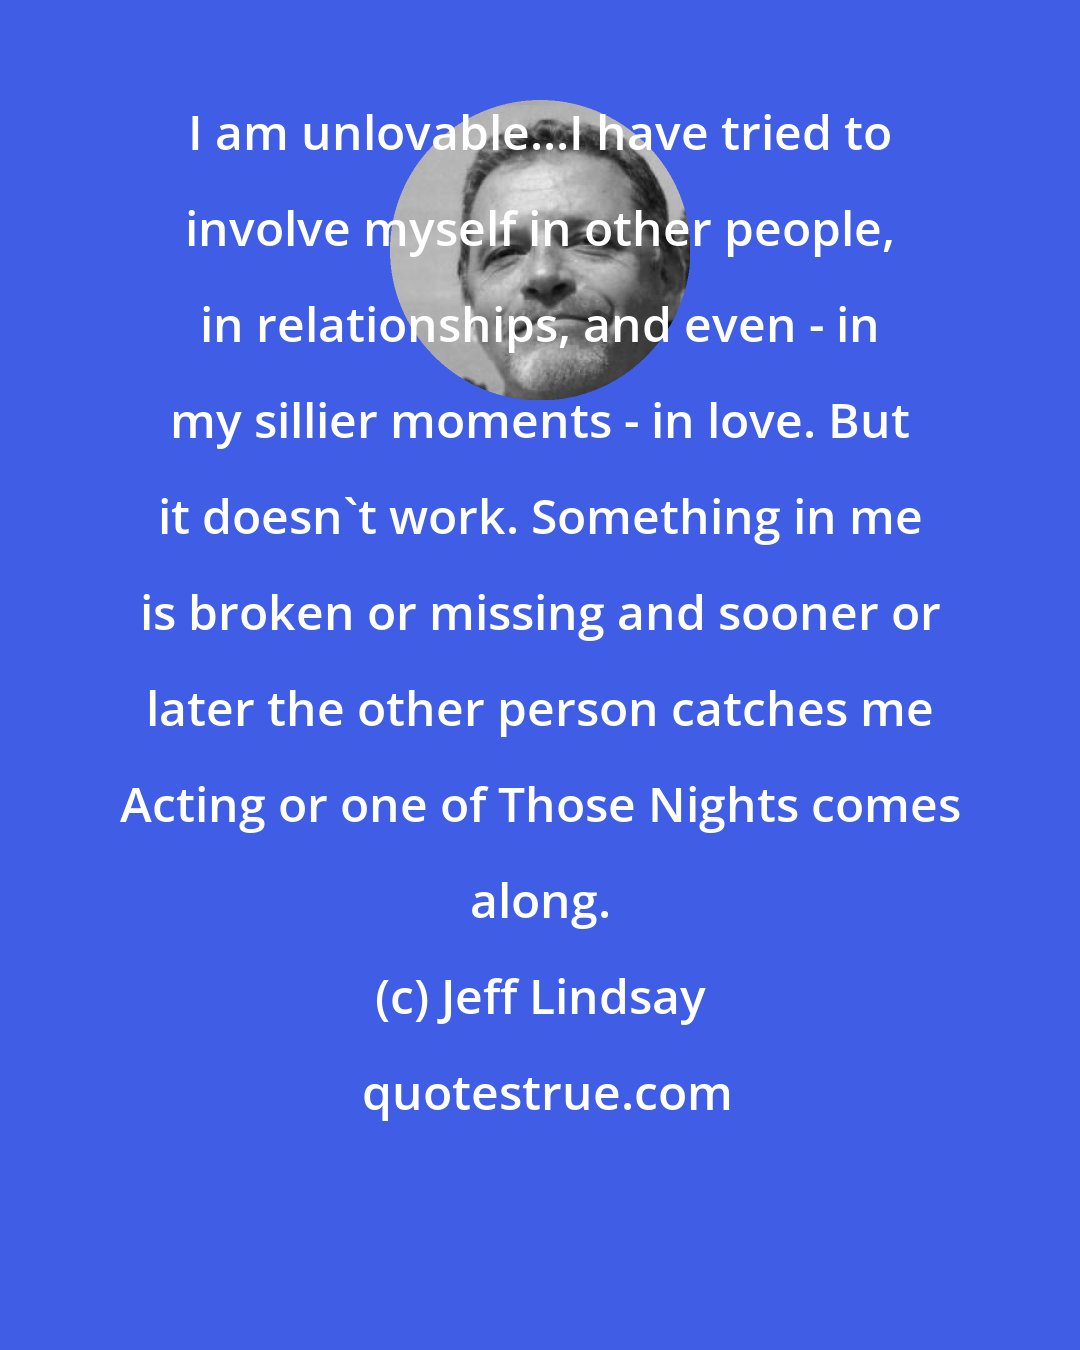 Jeff Lindsay: I am unlovable...I have tried to involve myself in other people, in relationships, and even - in my sillier moments - in love. But it doesn't work. Something in me is broken or missing and sooner or later the other person catches me Acting or one of Those Nights comes along.